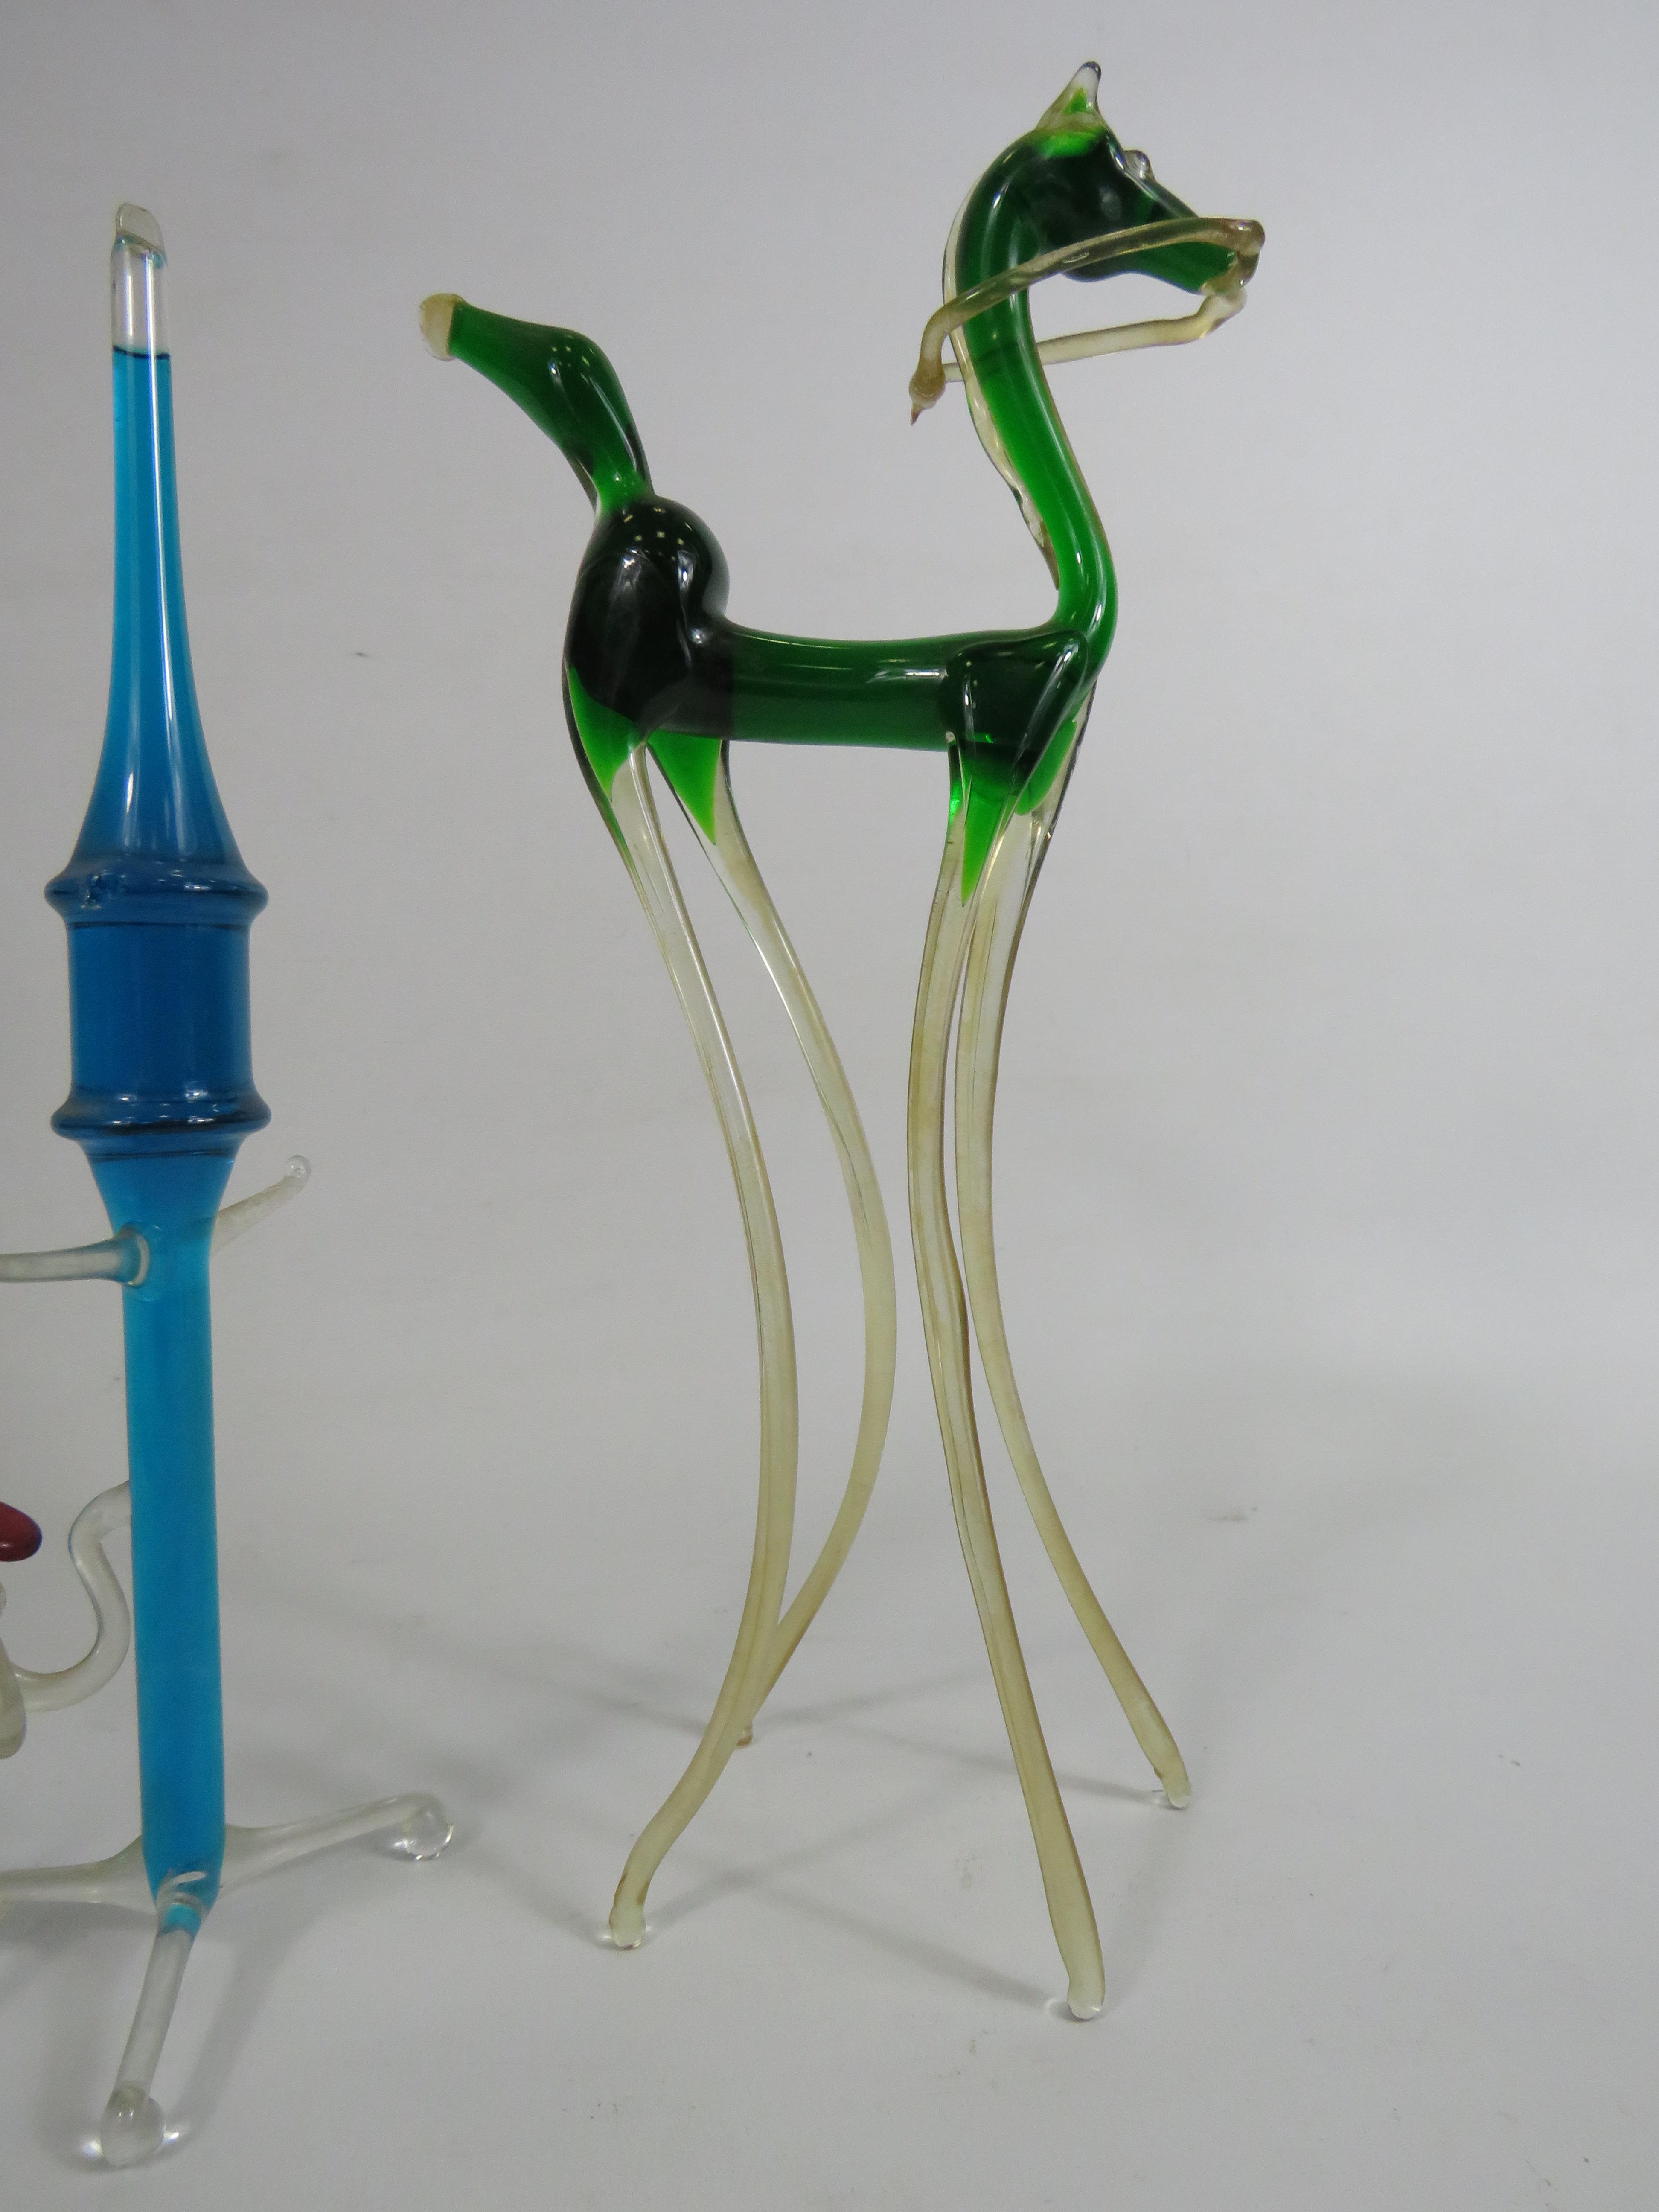 Two large art glass figures filled with liquid, the tallest stands 29cm. - Image 3 of 3